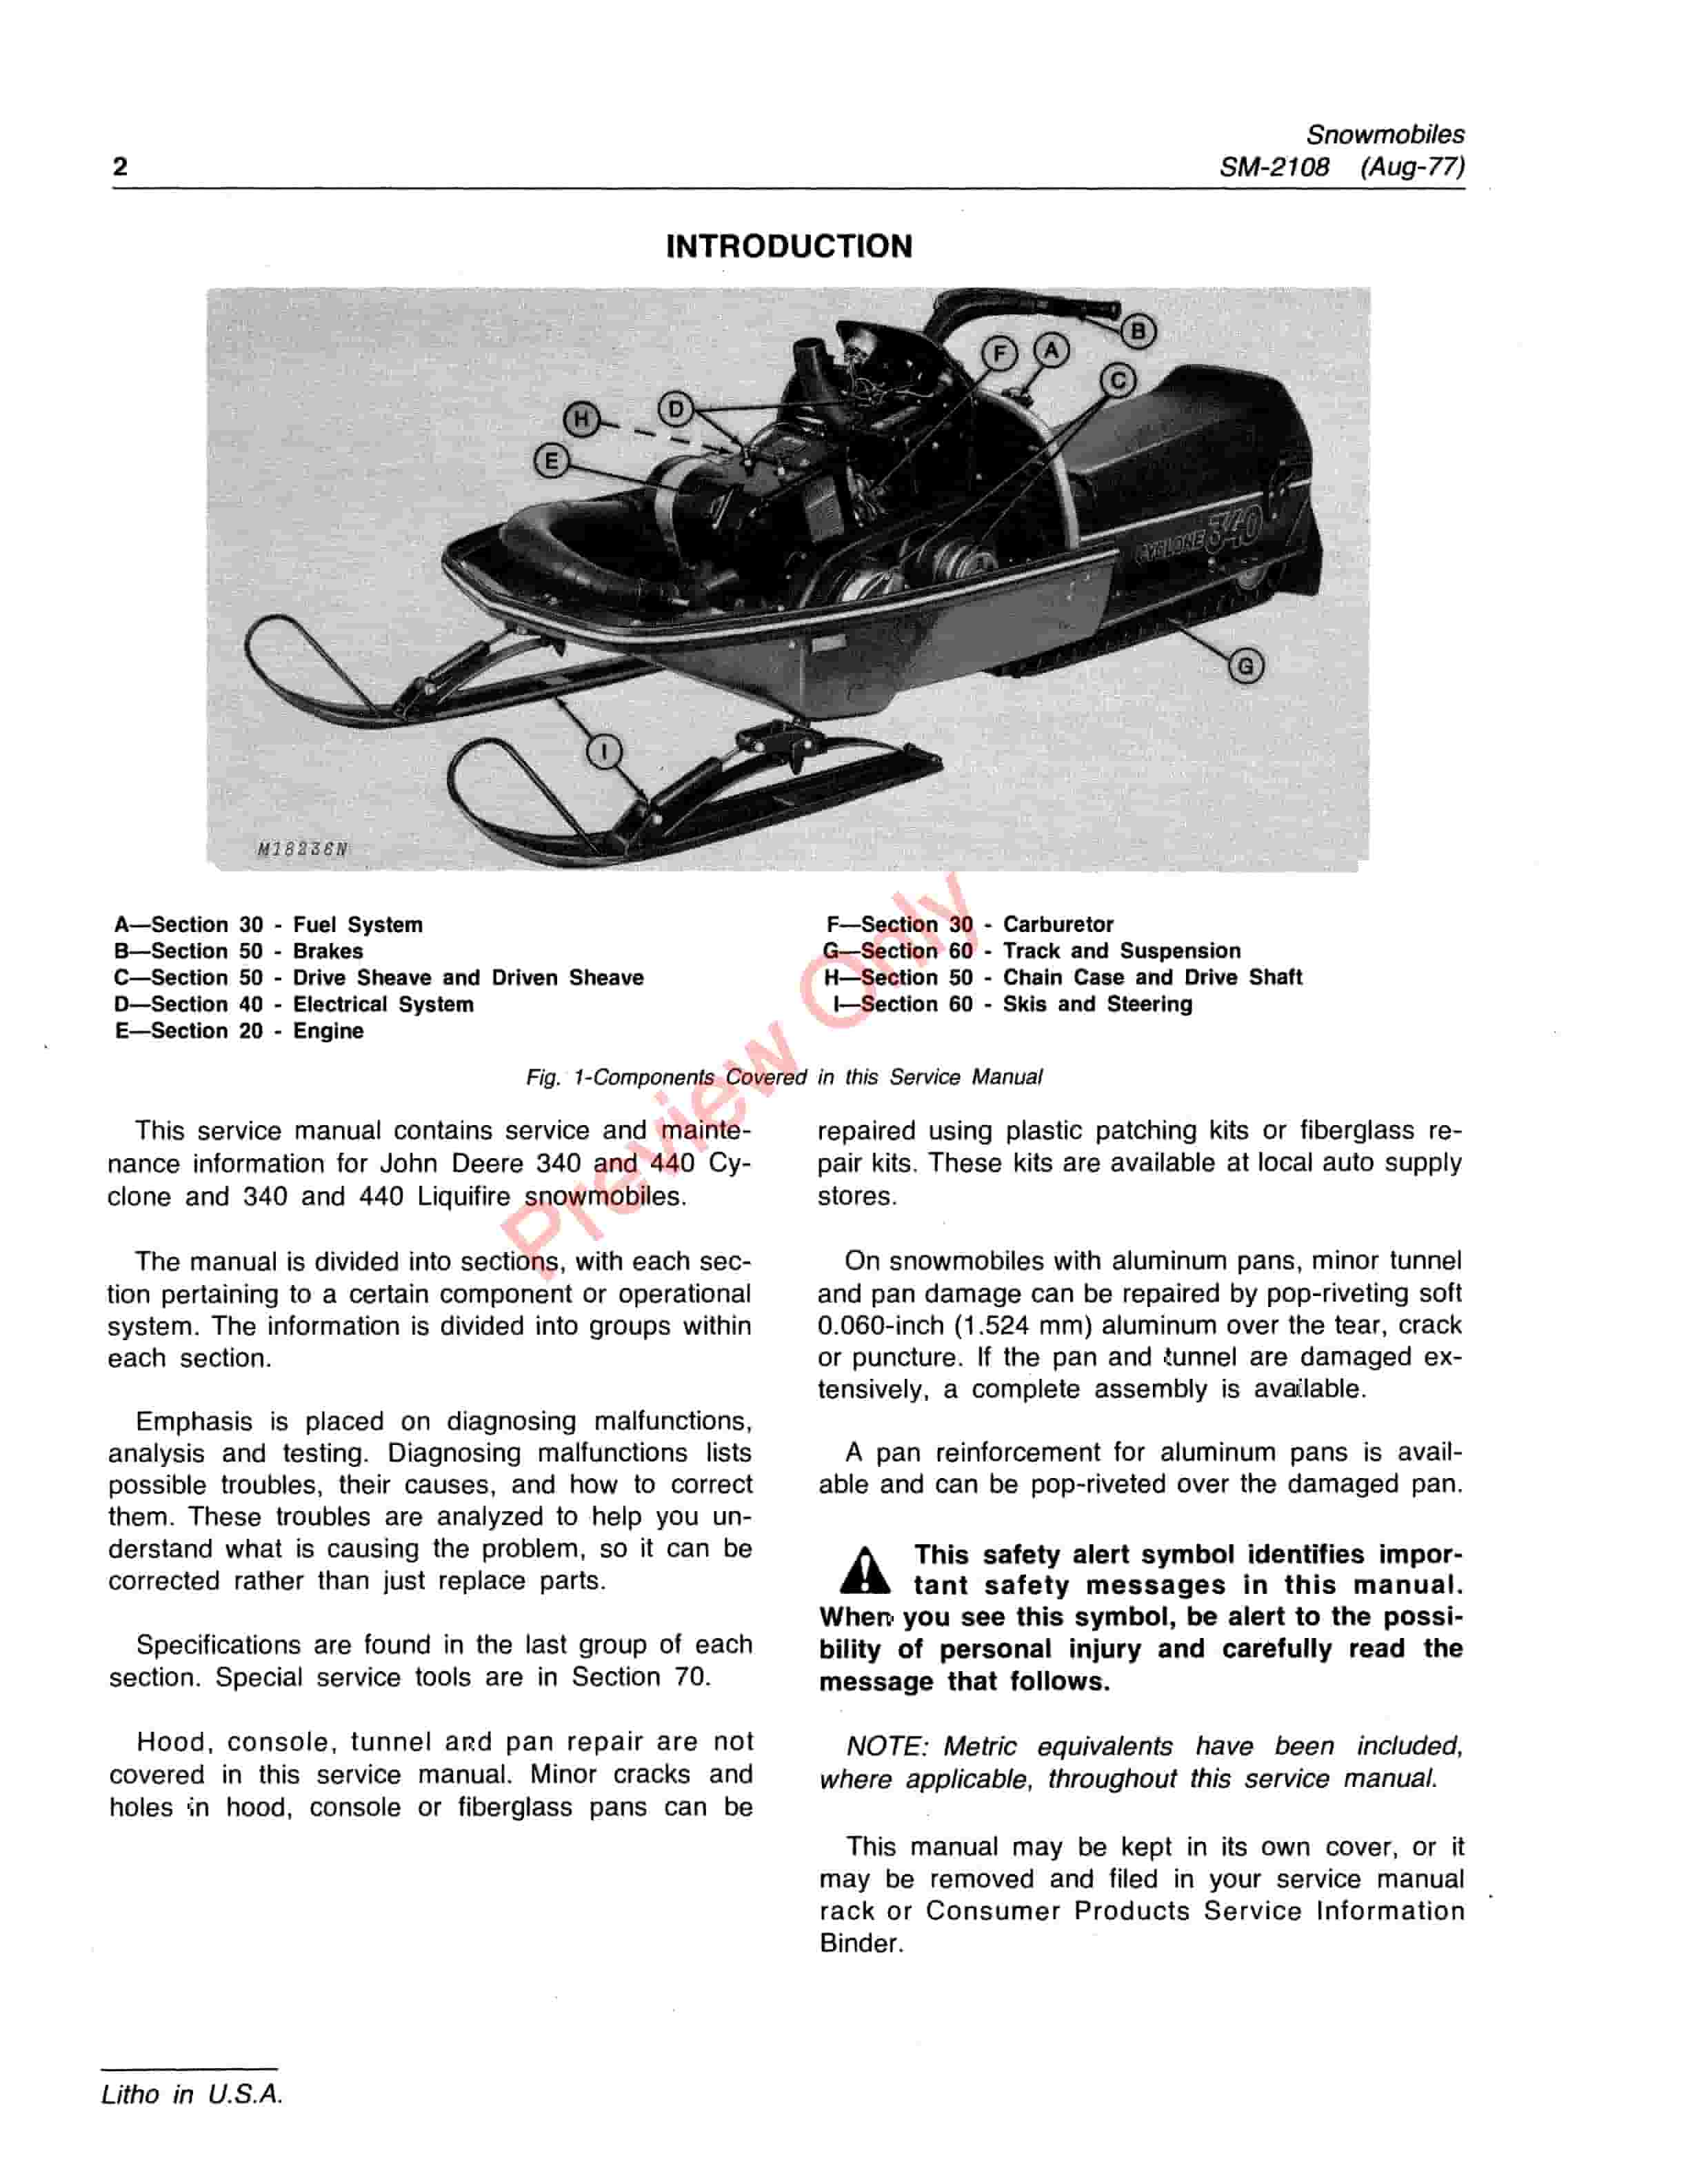 John Deere 340 And 440 Snowmobiles Cyclone And Liquifire Service Manual SM2108 01AUG77 4